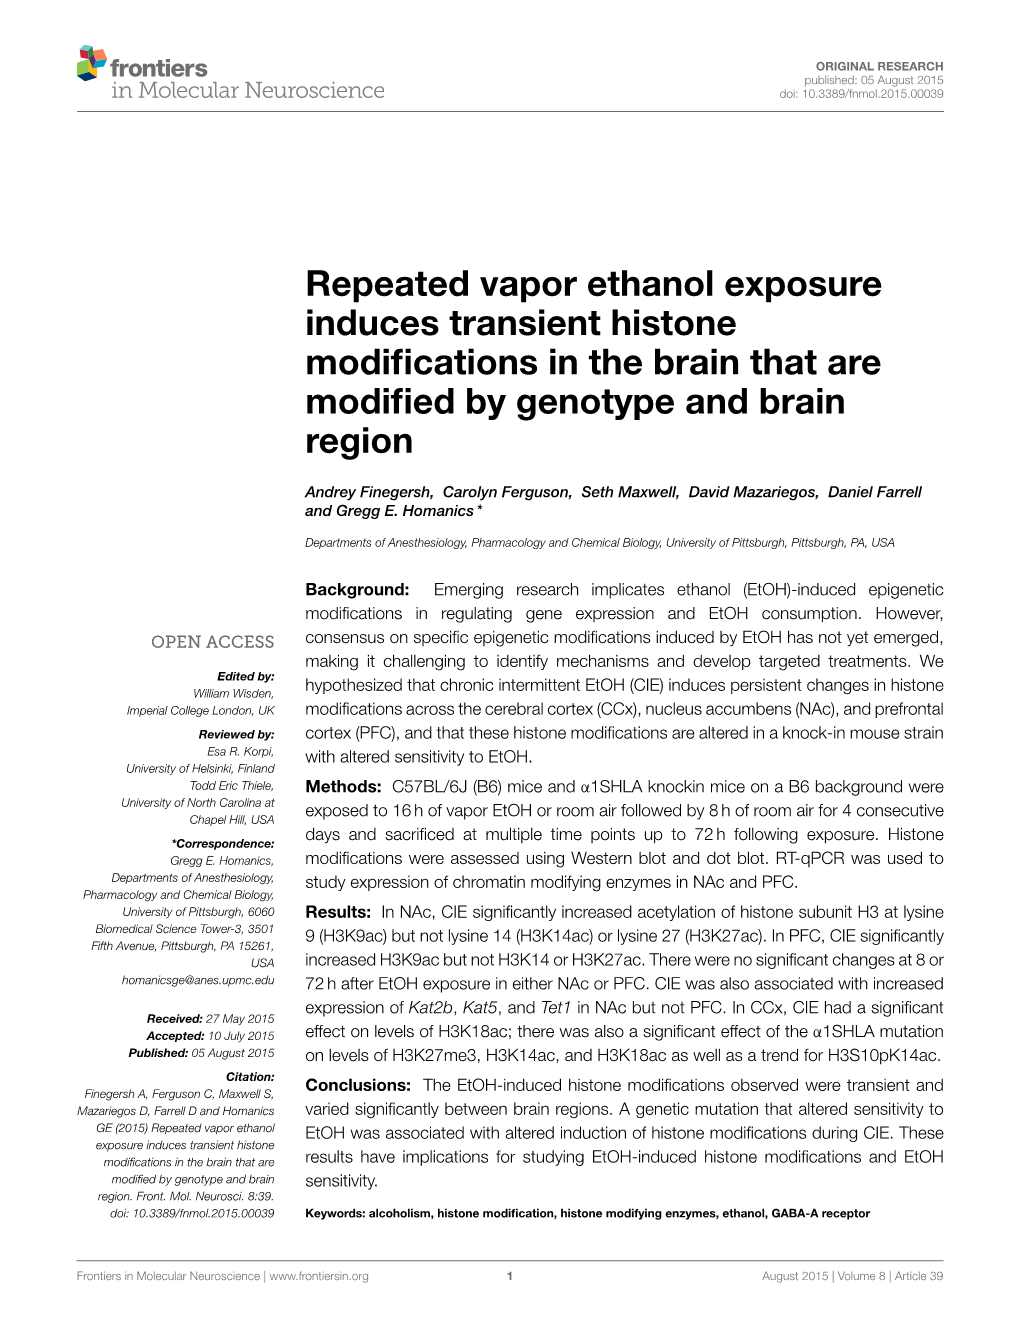 Repeated Vapor Ethanol Exposure Induces Transient Histone Modiﬁcations in the Brain That Are Modiﬁed by Genotype and Brain Region